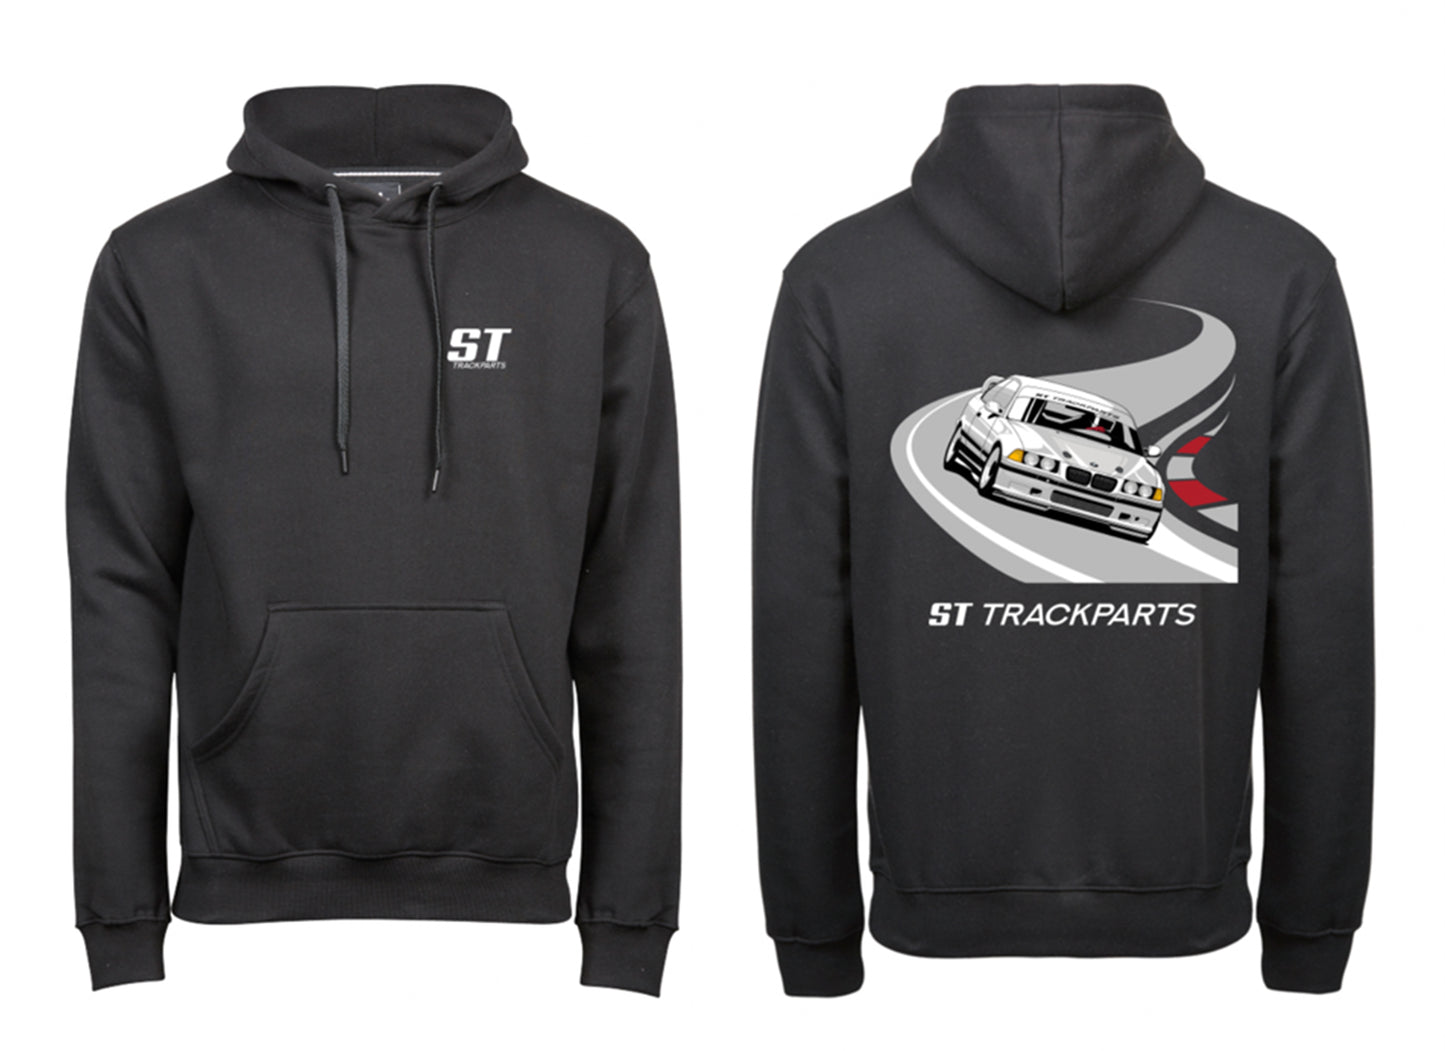 ST-Trackparts E36 Hoodie